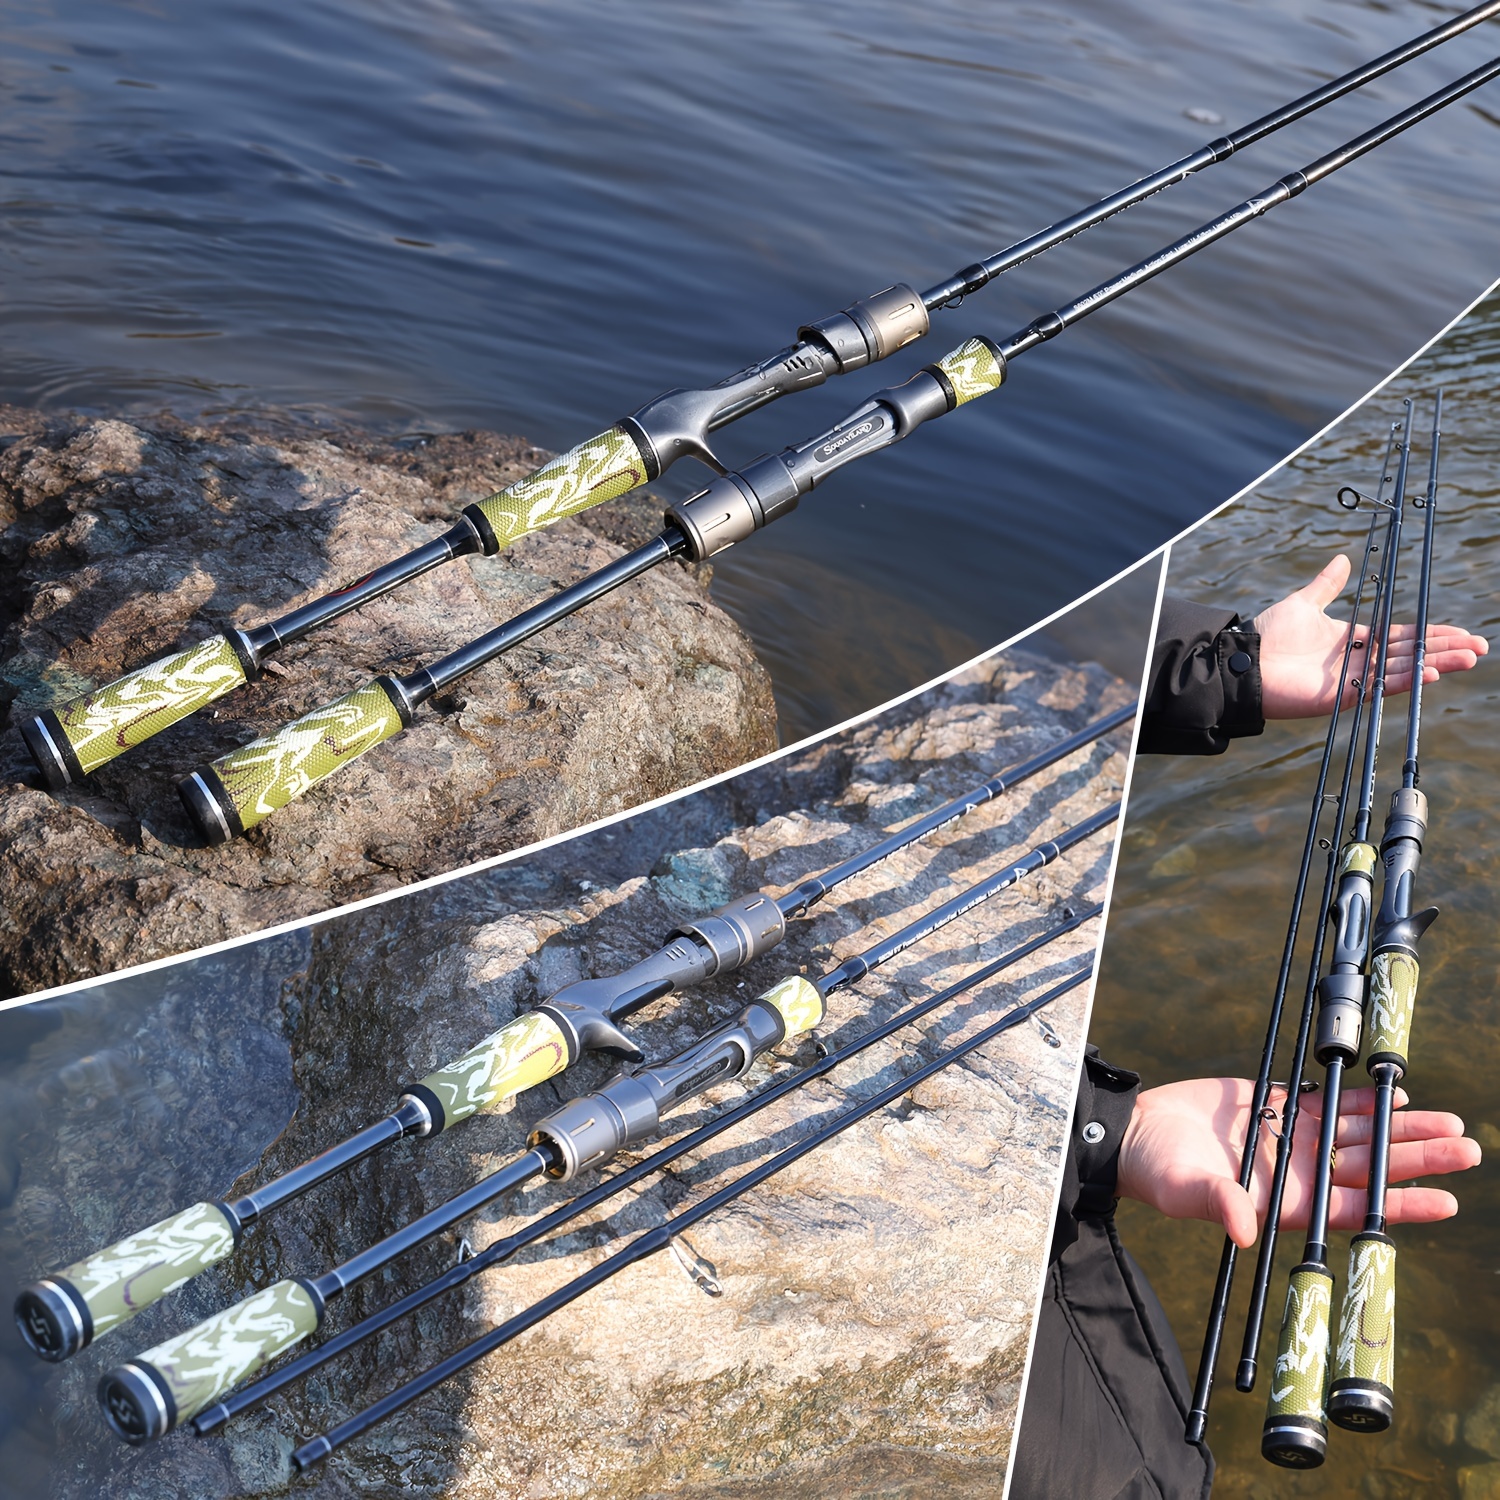 Sougayilang Fishing Rod and Reel Combo 2 Pieces Fast Action